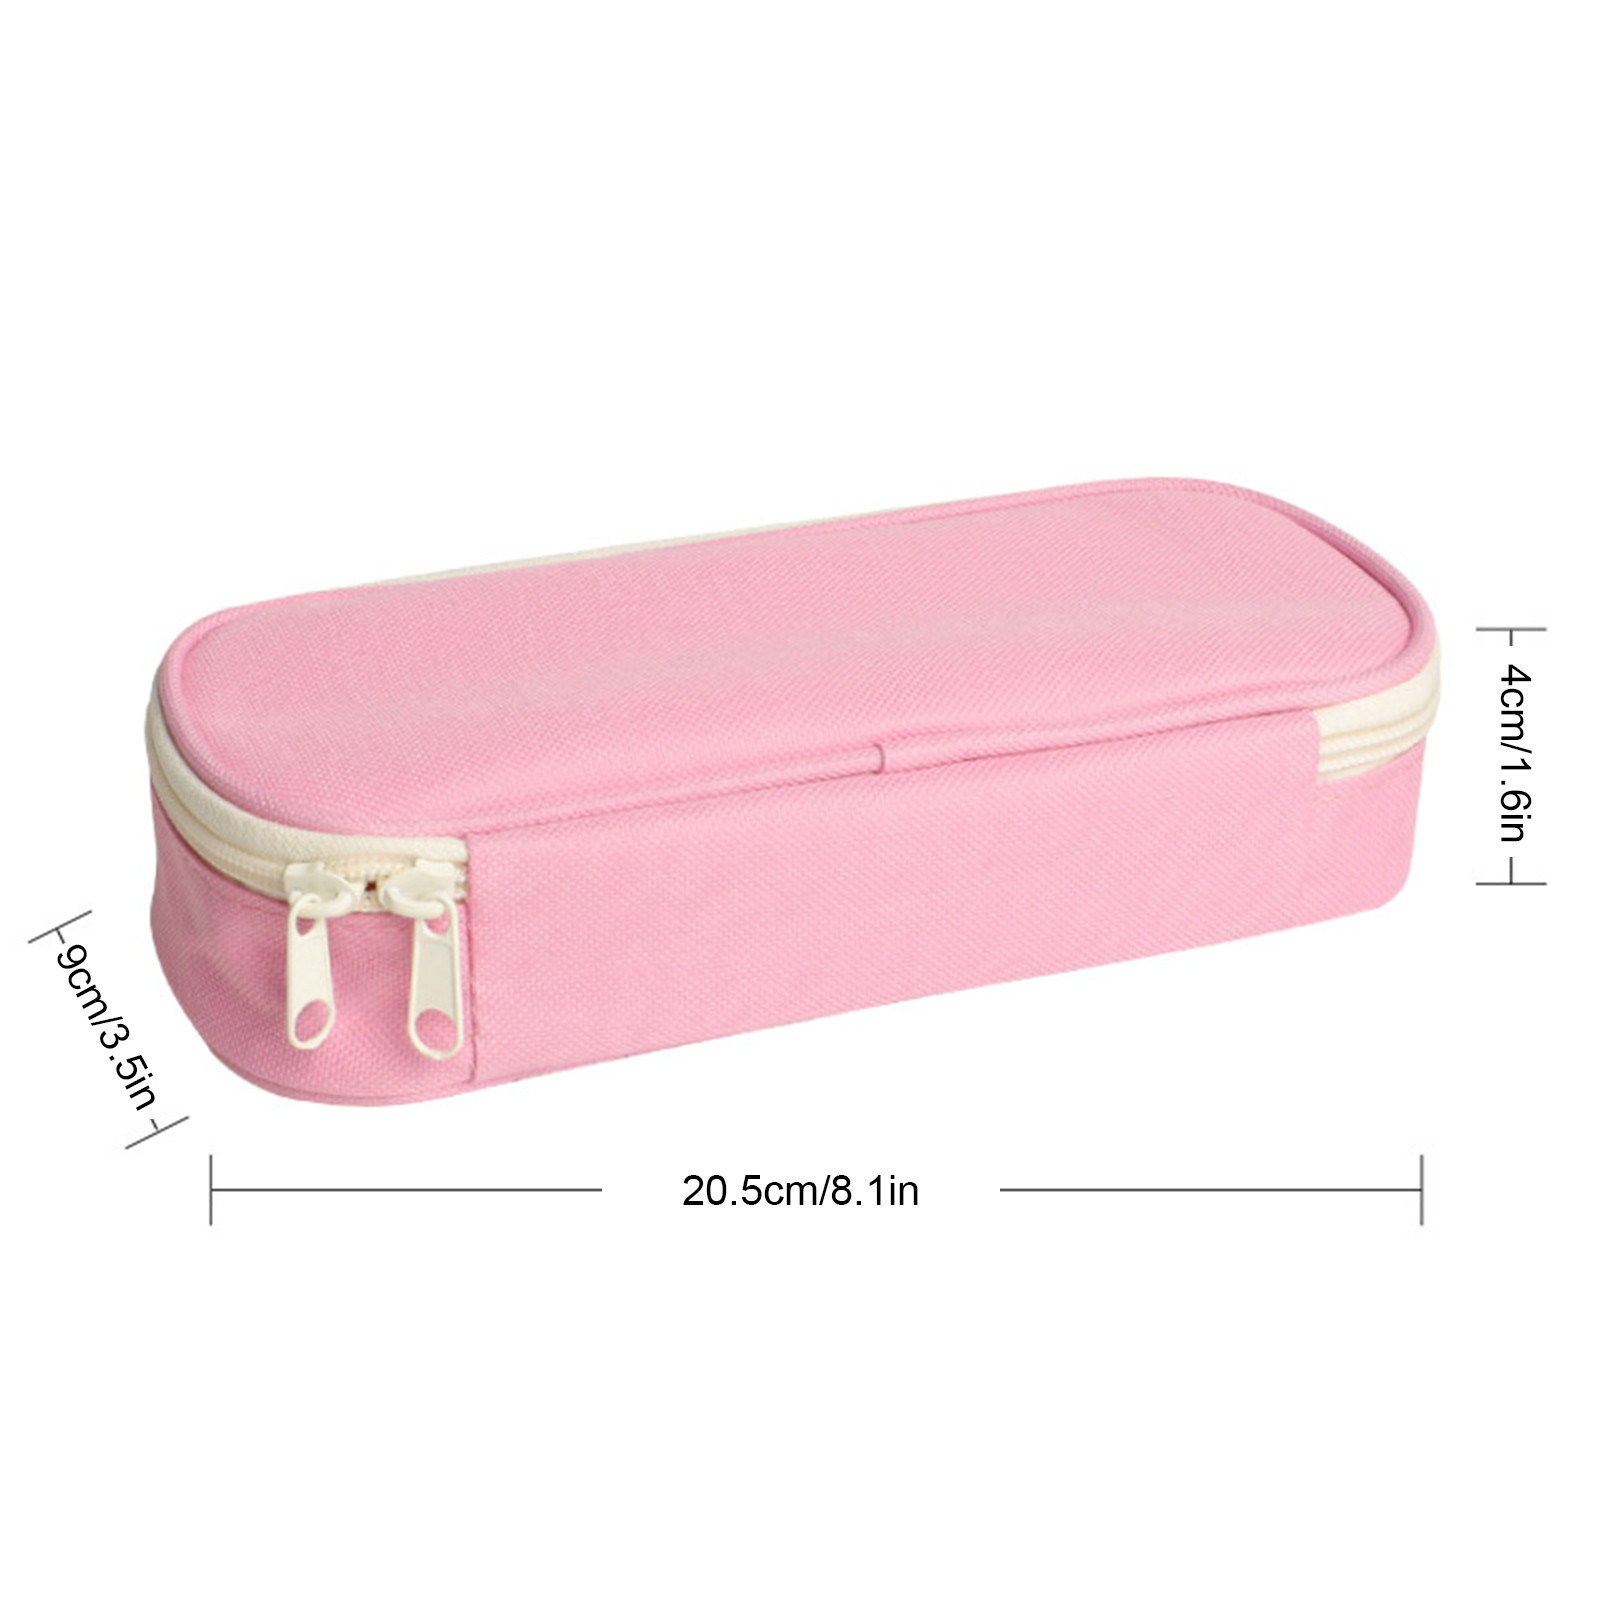 JMKQLZ Large Capacity Pencil Case, Student Pencil Pouch Storage Bag with Zipper for School Office, Pink, Size: One Size